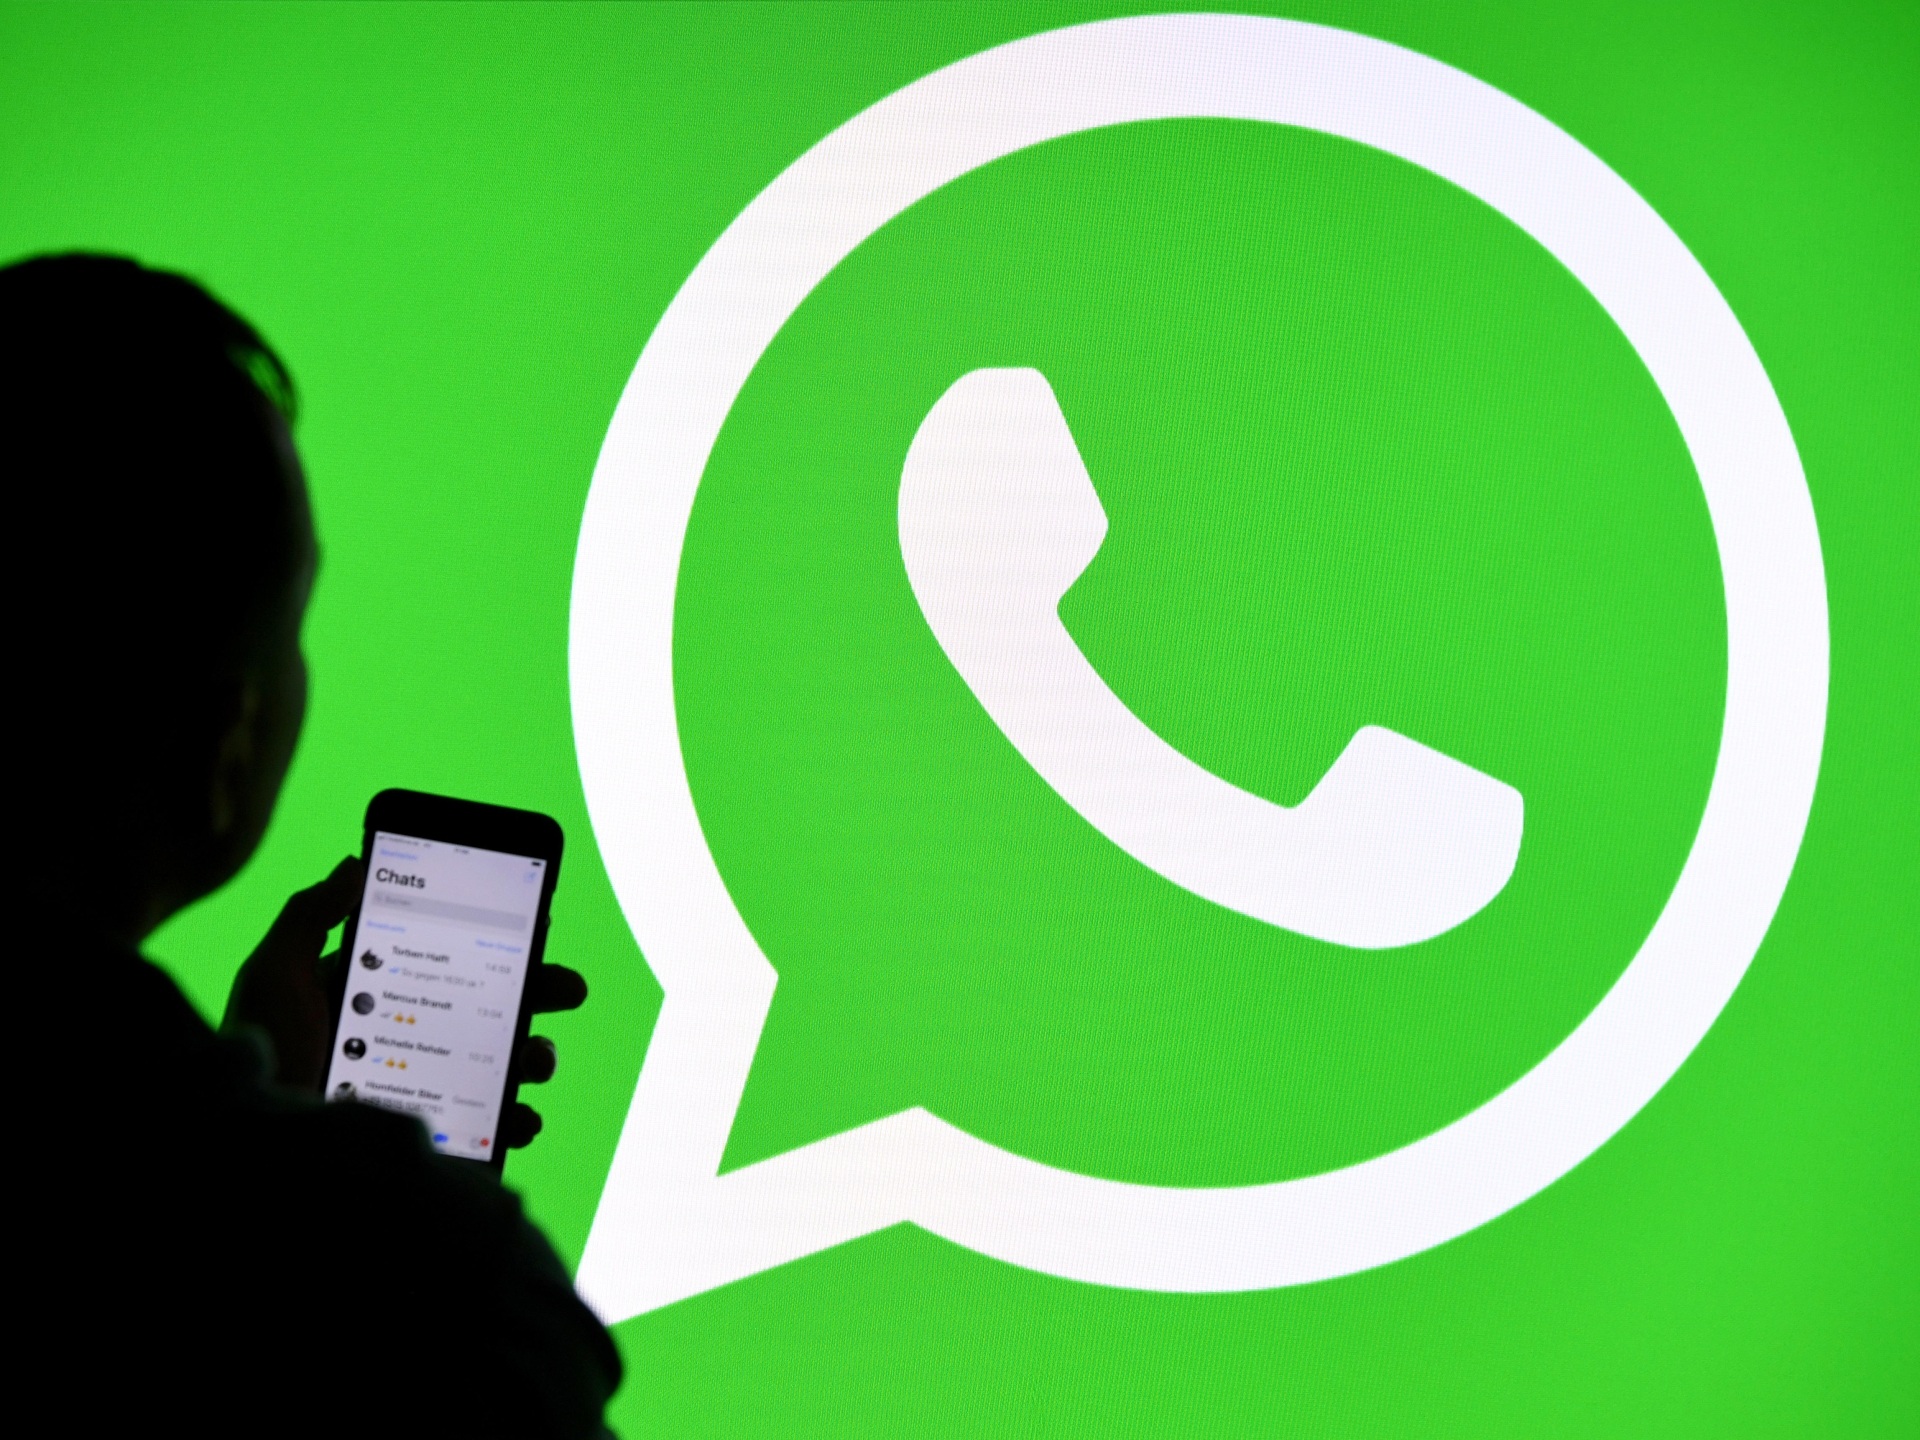 WhatsApp: Better to have UK restrictions than to erode security